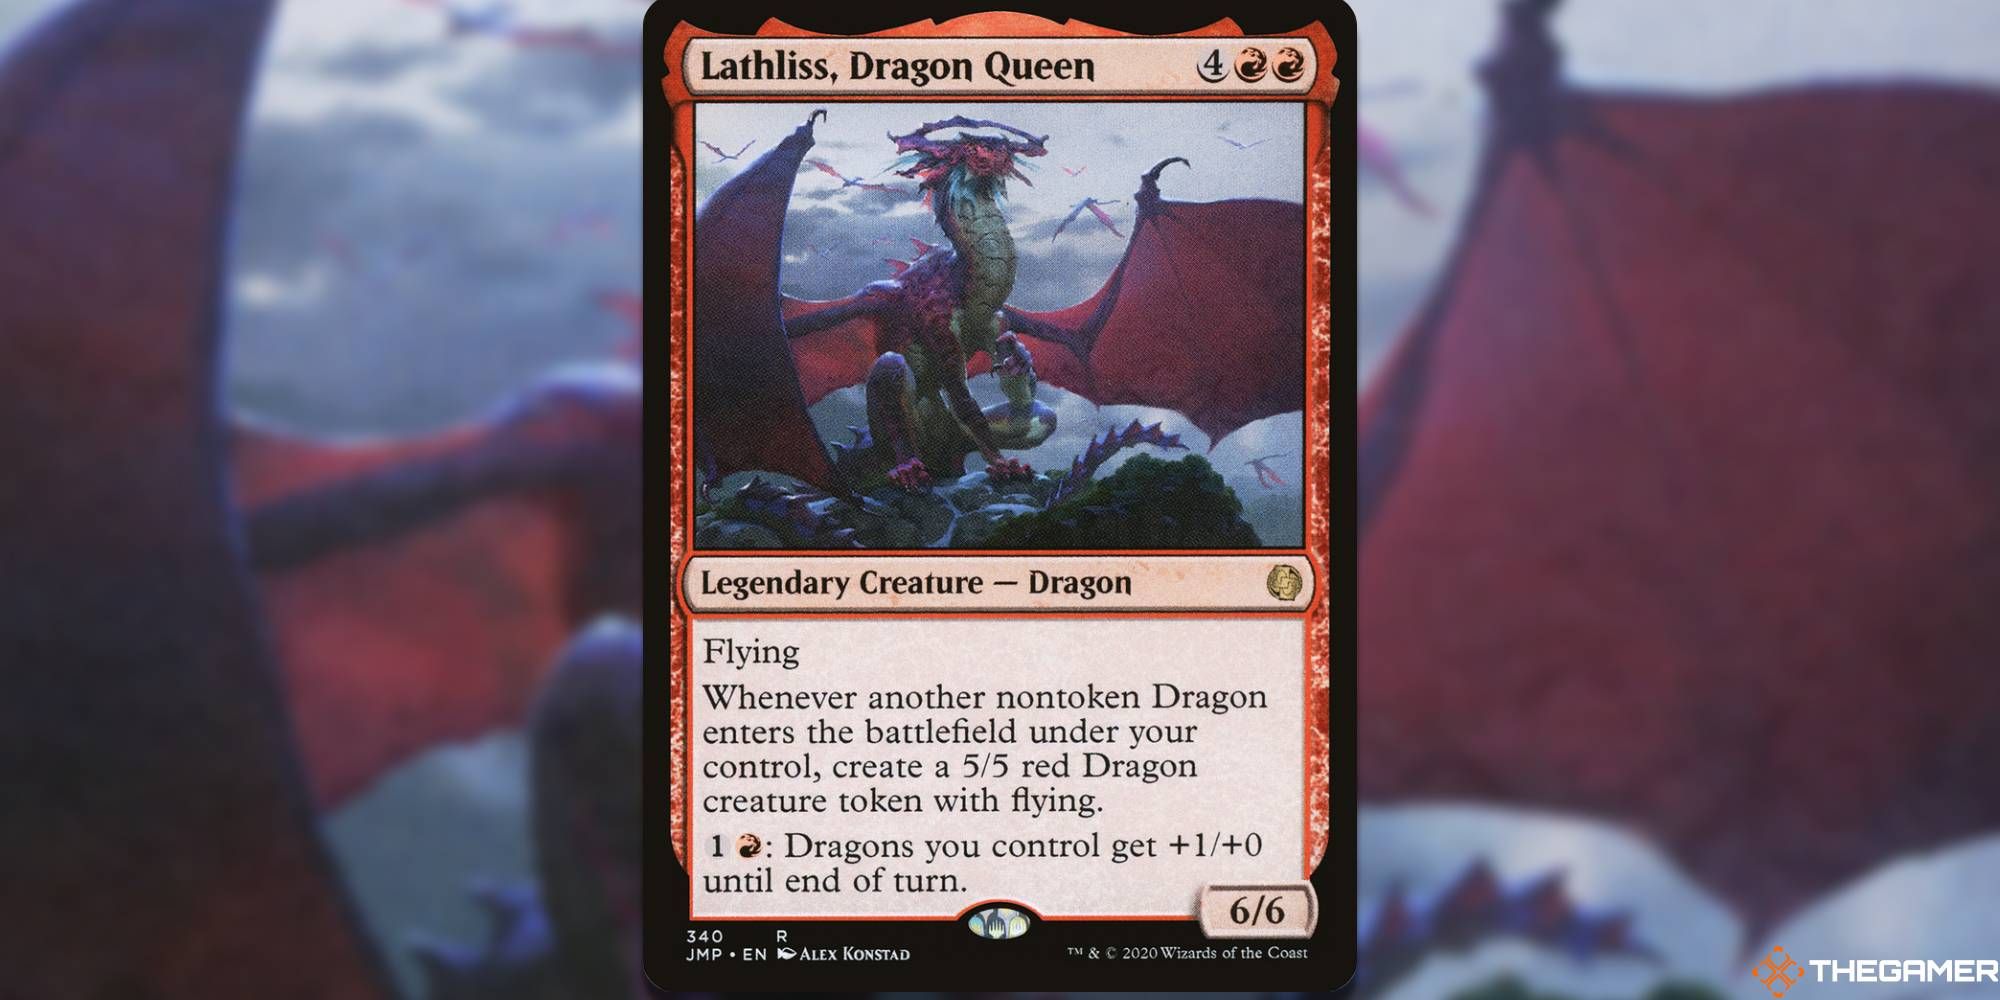 Lathliss, Dragon Queen Magic: The Gathering card overlaid over artwork.